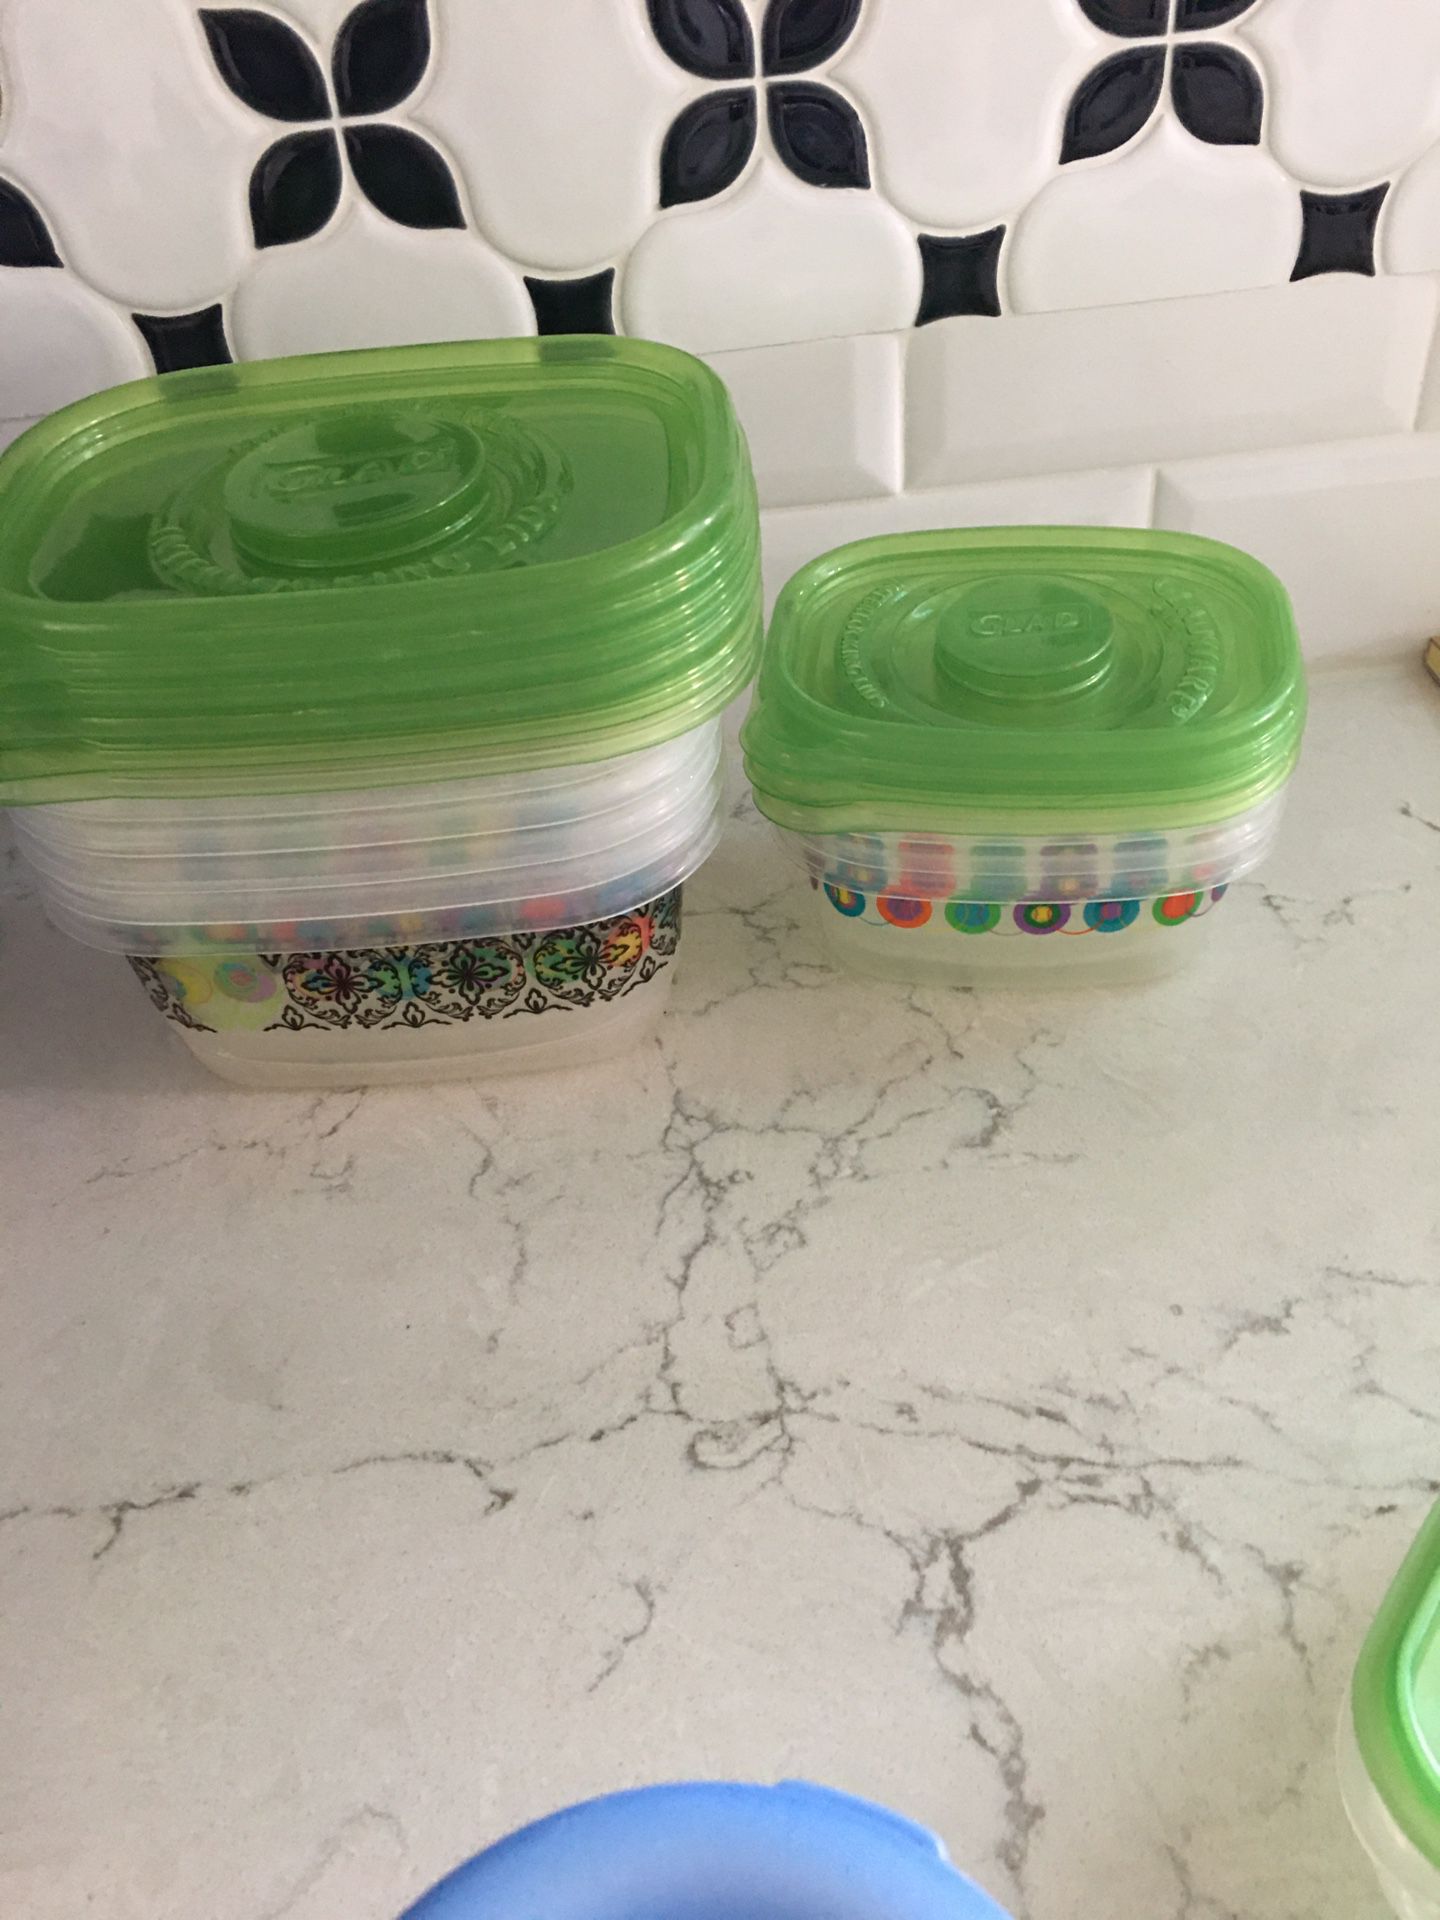 Food storage containers, 25 total